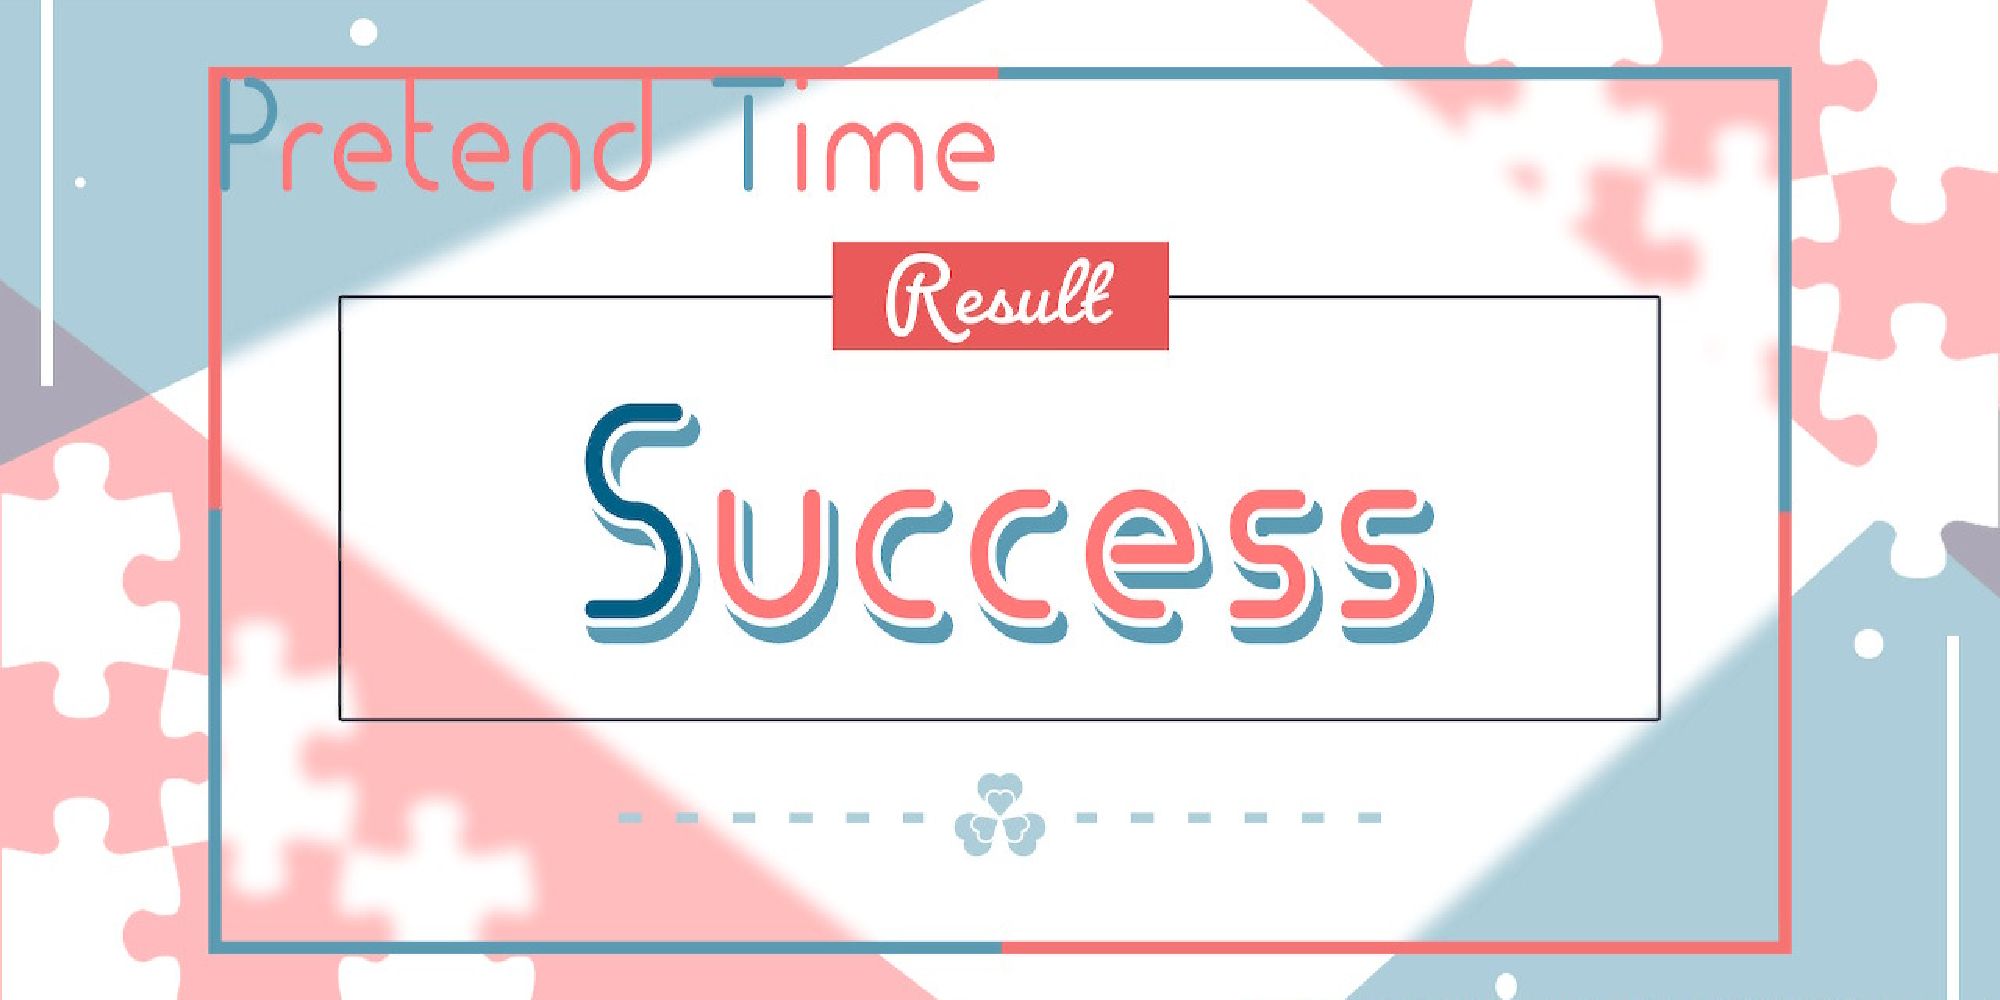 sucess screen for pretend time